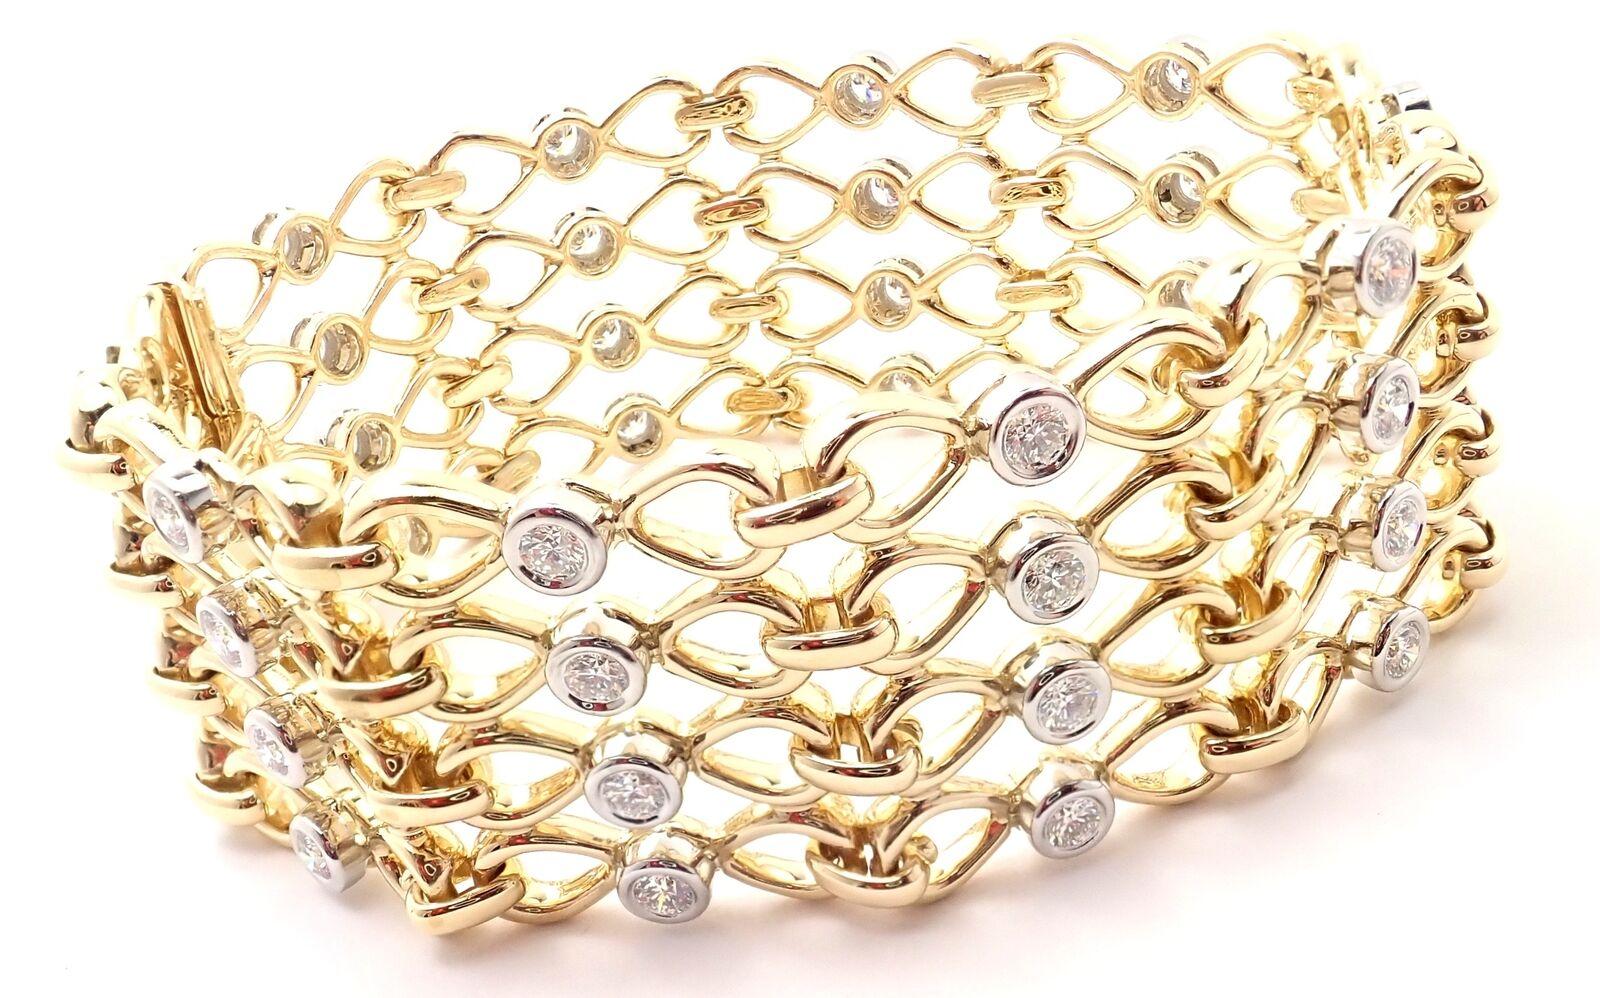 18k Yellow And Platinum Diamond Link Bracelet by Tiffany & Co.
With 40 Round brilliant cut diamonds VS1 clarity, G color total weight approximately 3.20ct
Details:
Weight: 75.1 grams
Length: 7